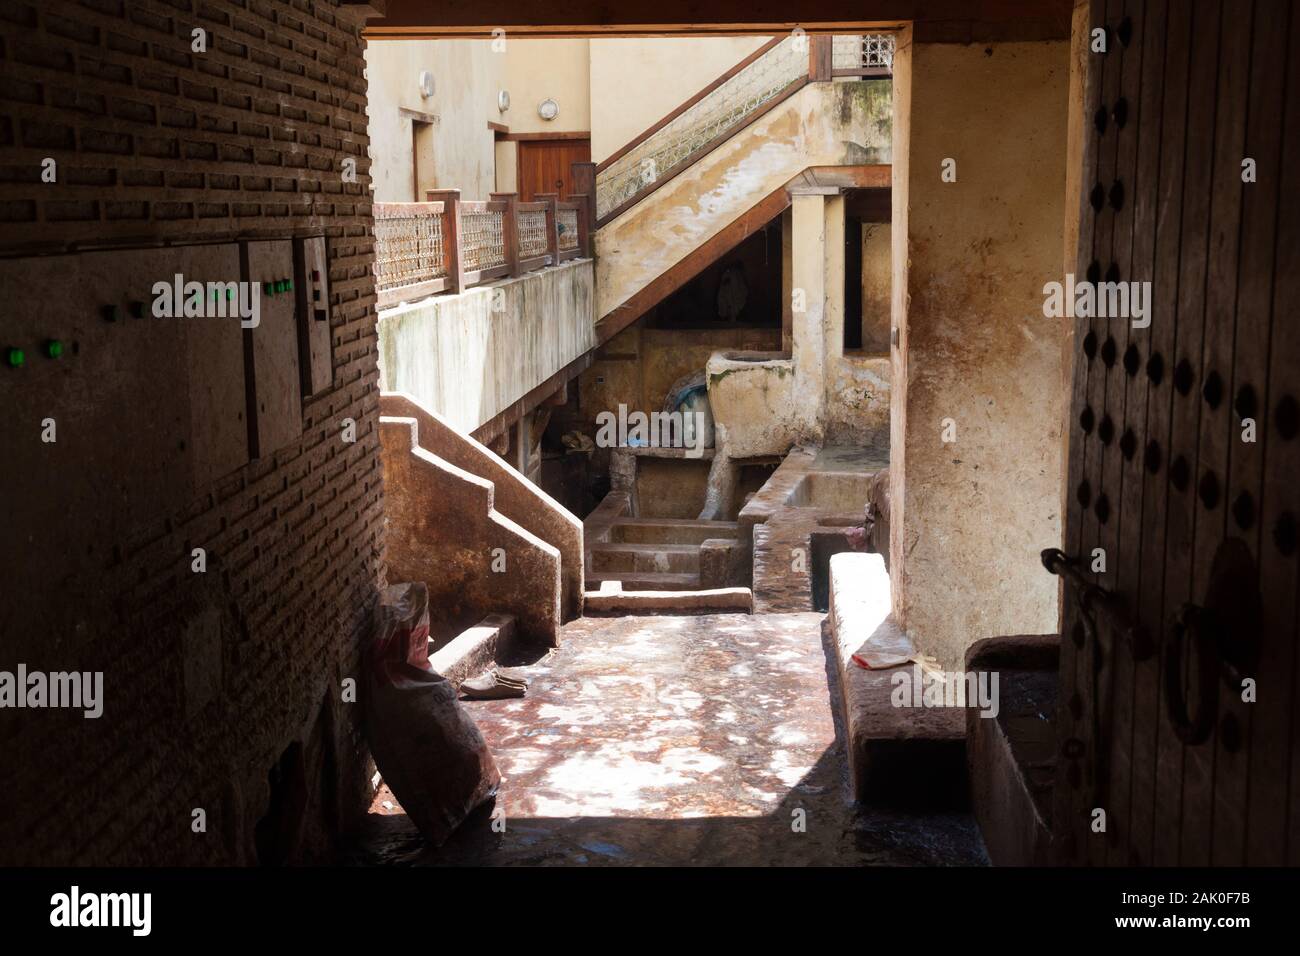 Scenery of Chouara Tannery in Fes (Fez), Morocco Stock Photo